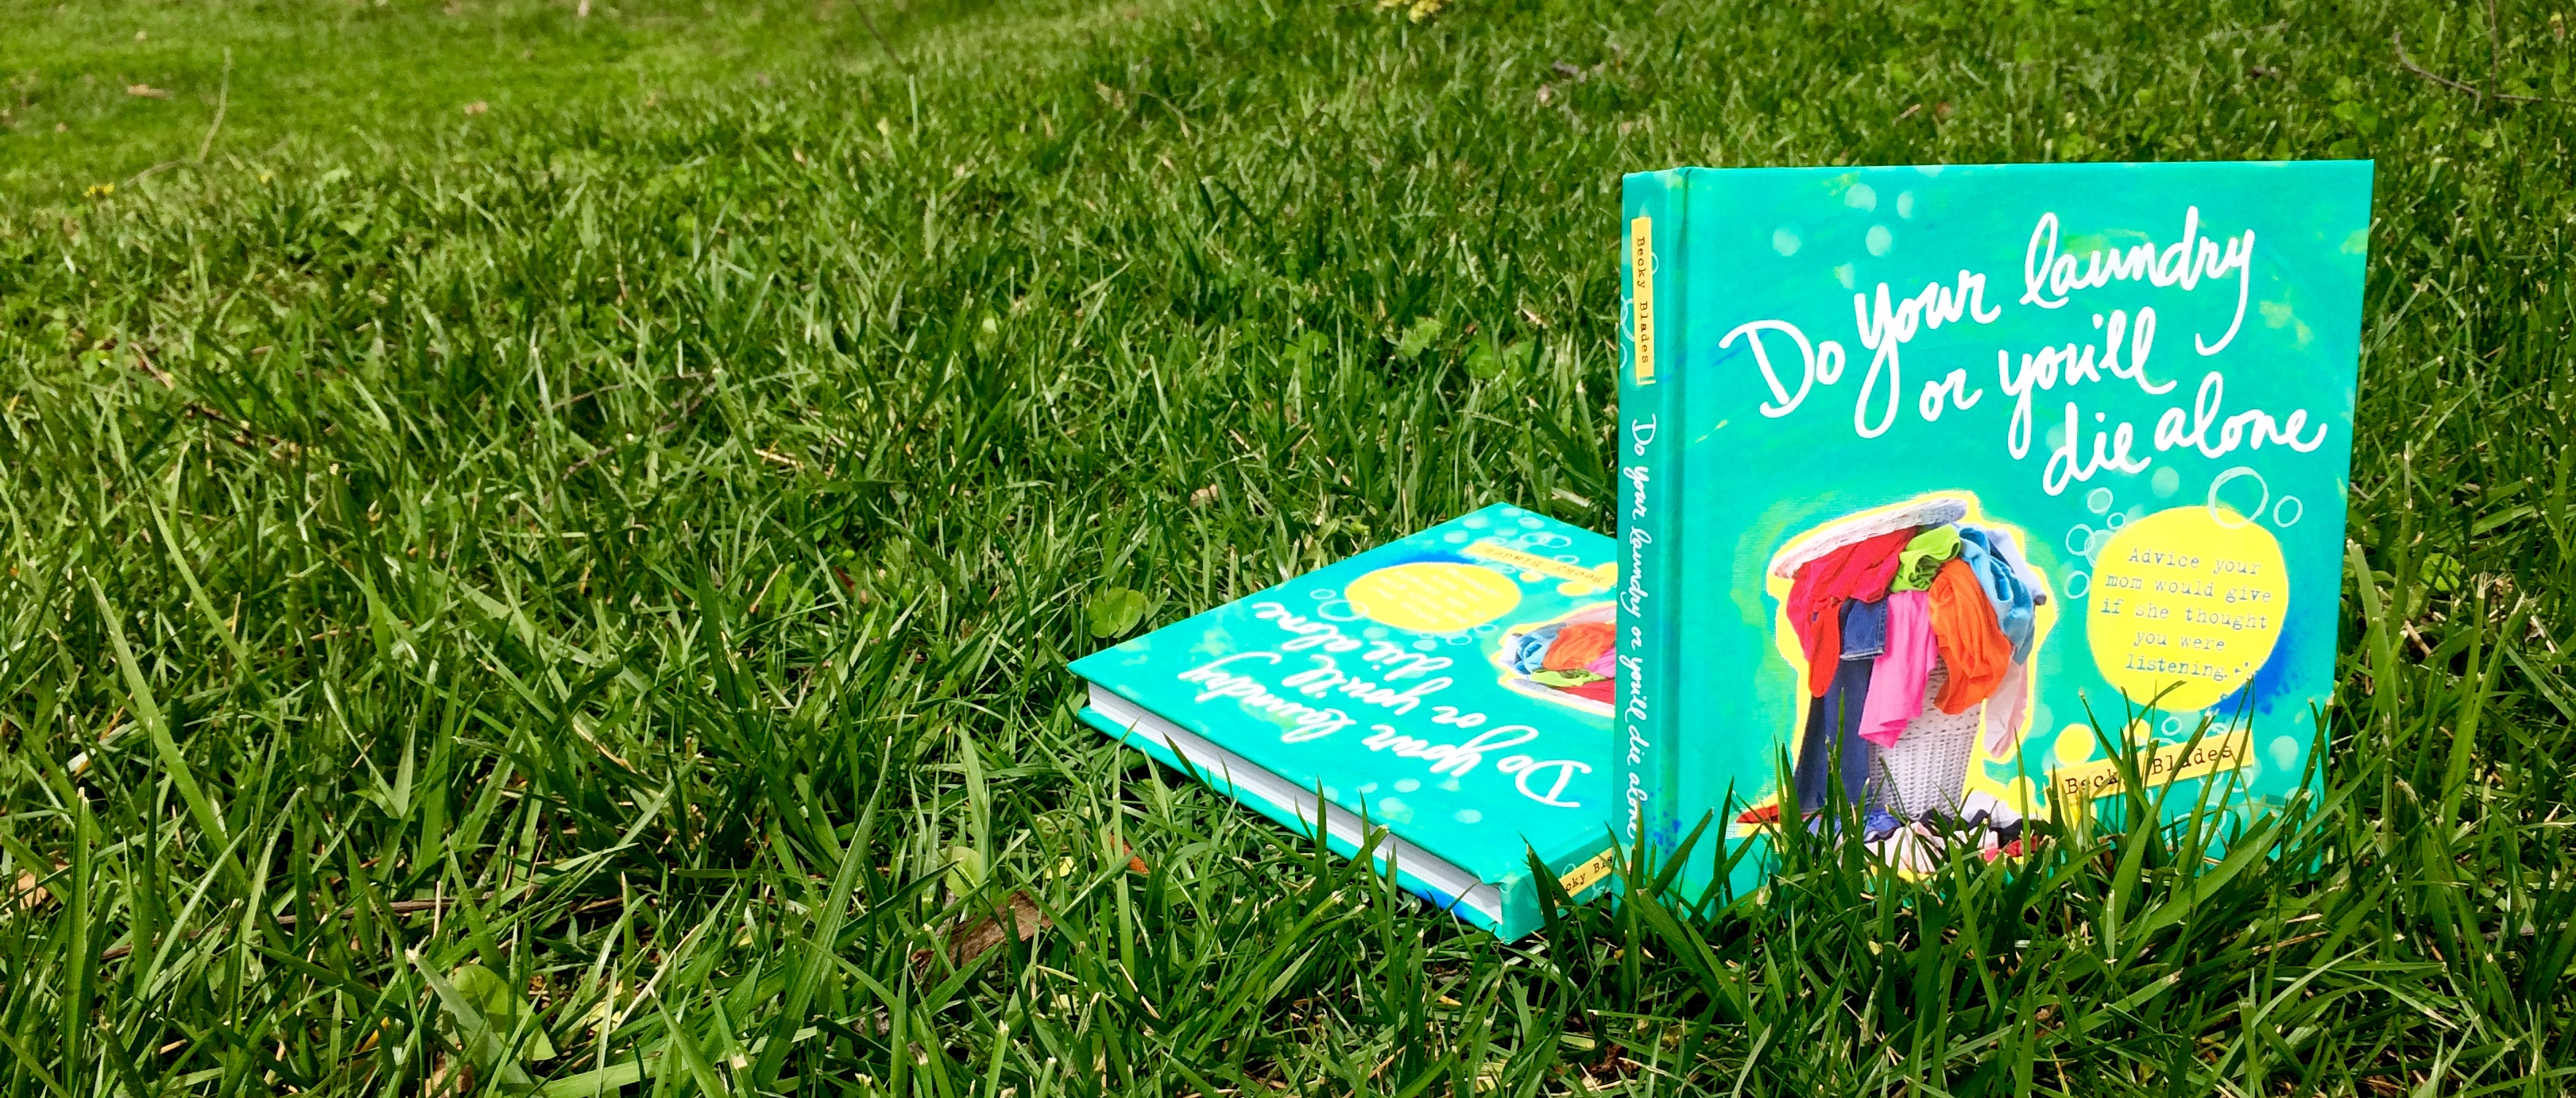 do your laundry or you'll die alone book on grass